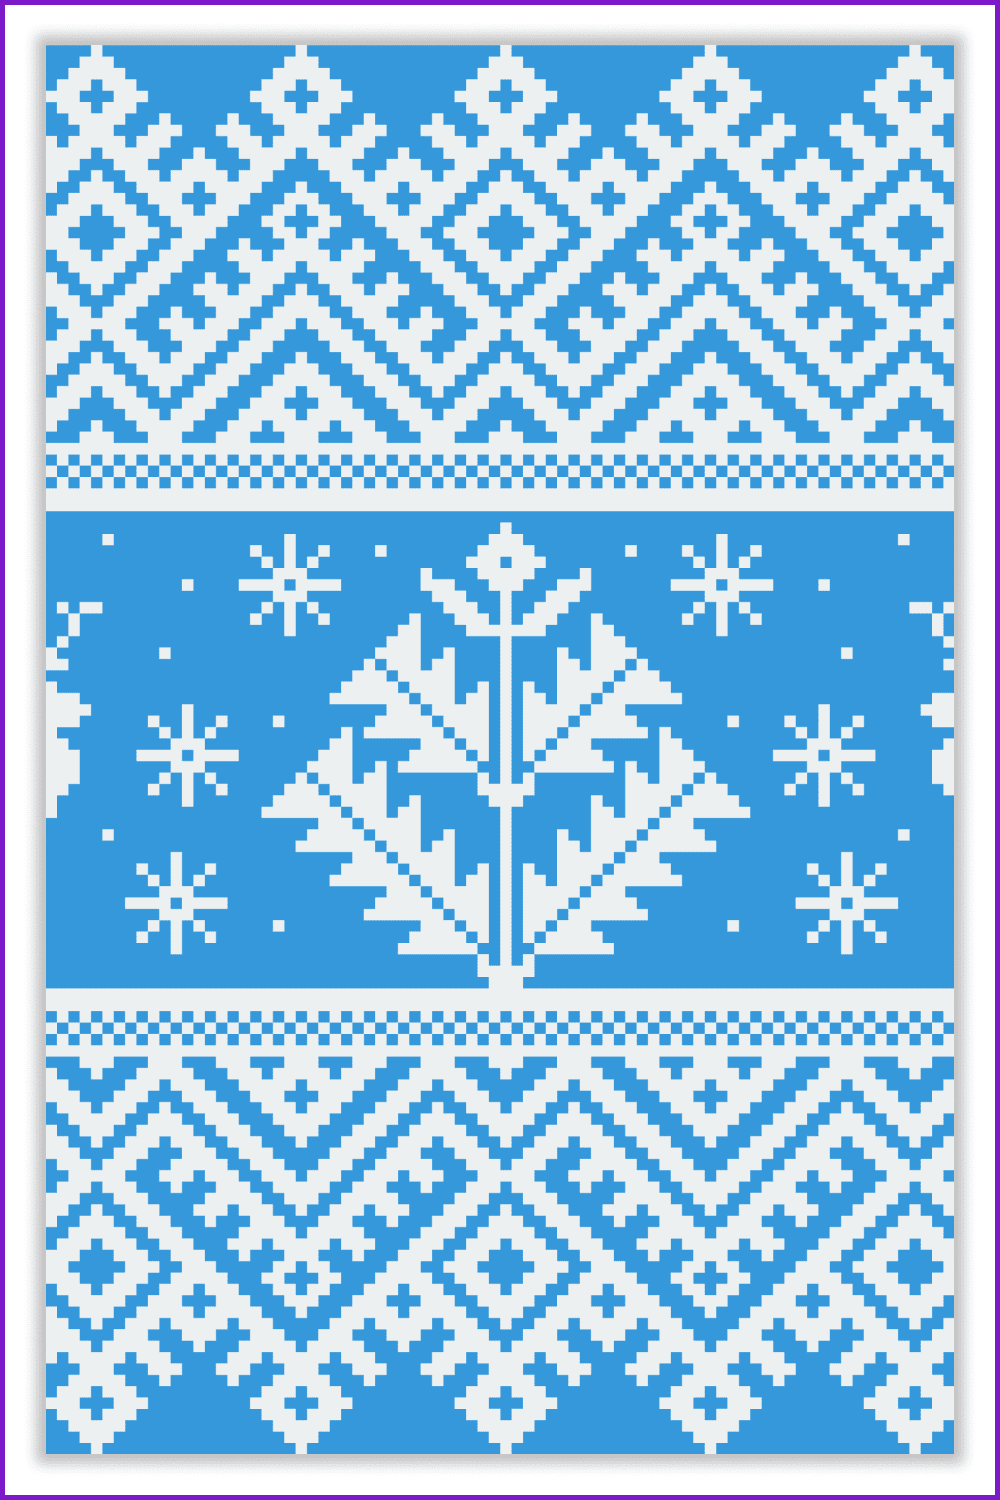 An image of an ethnic pattern in blue and white.